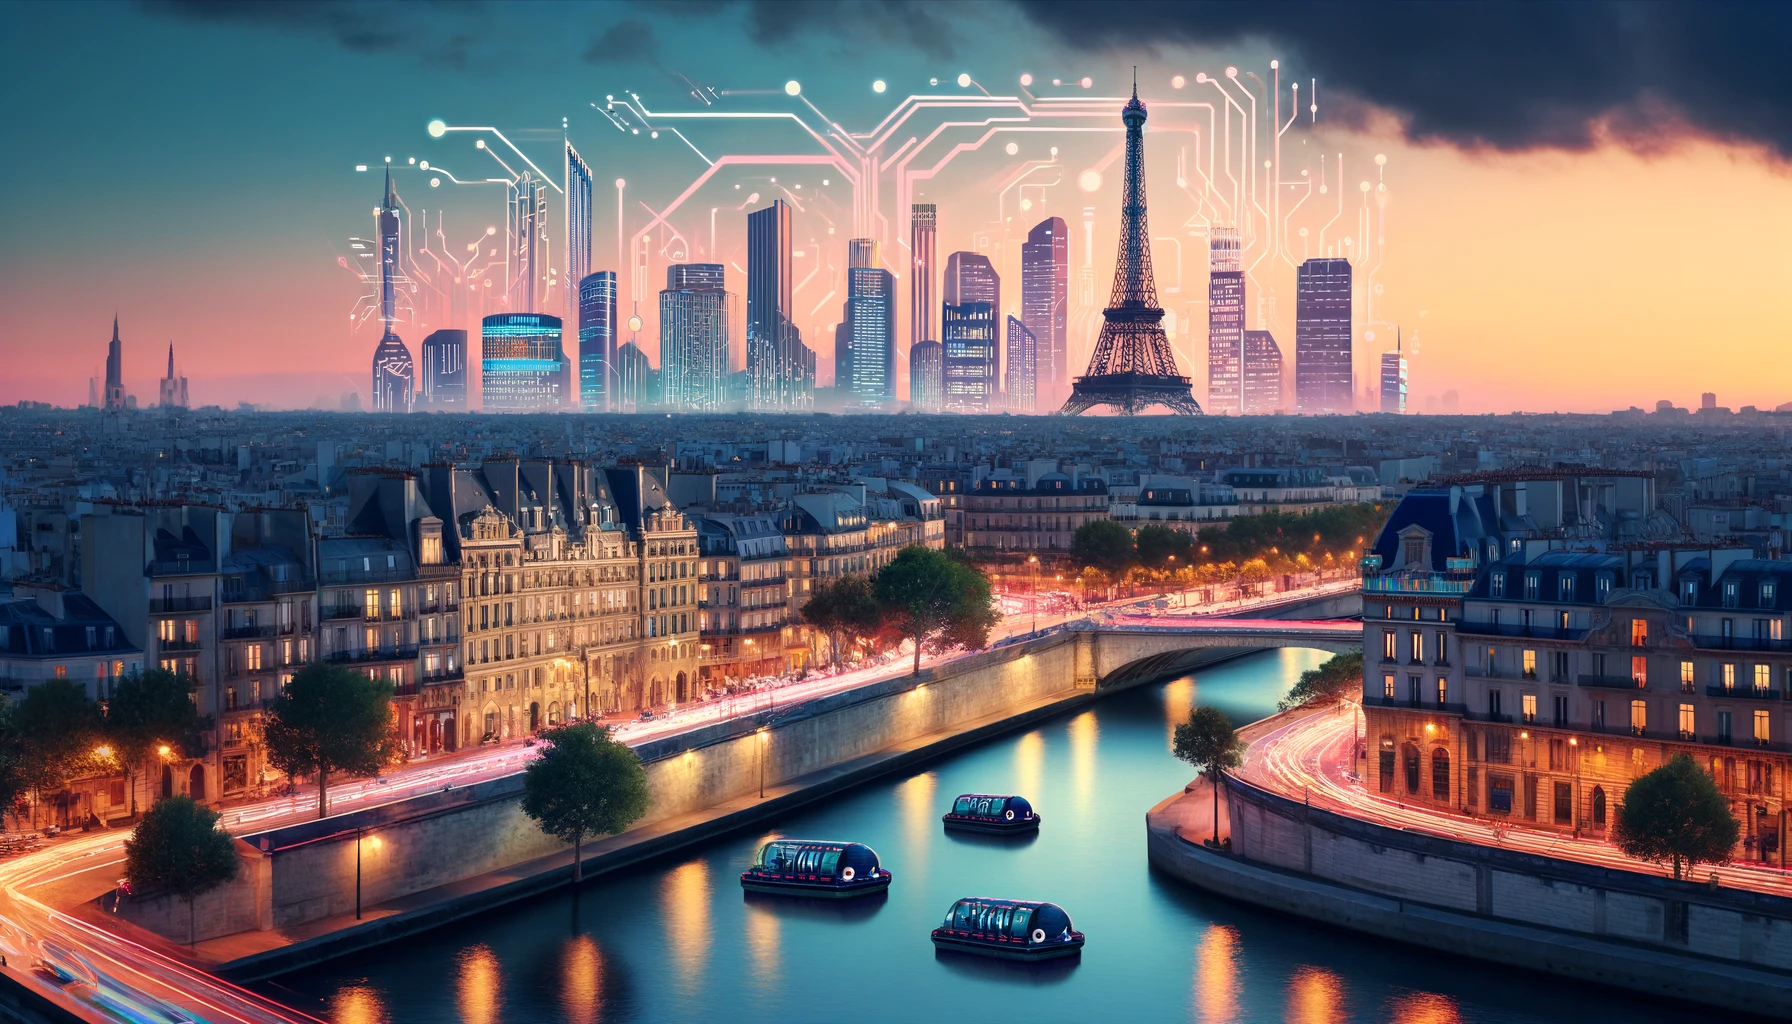 “La French Tech” – A Tour de Force of Innovation and Growth